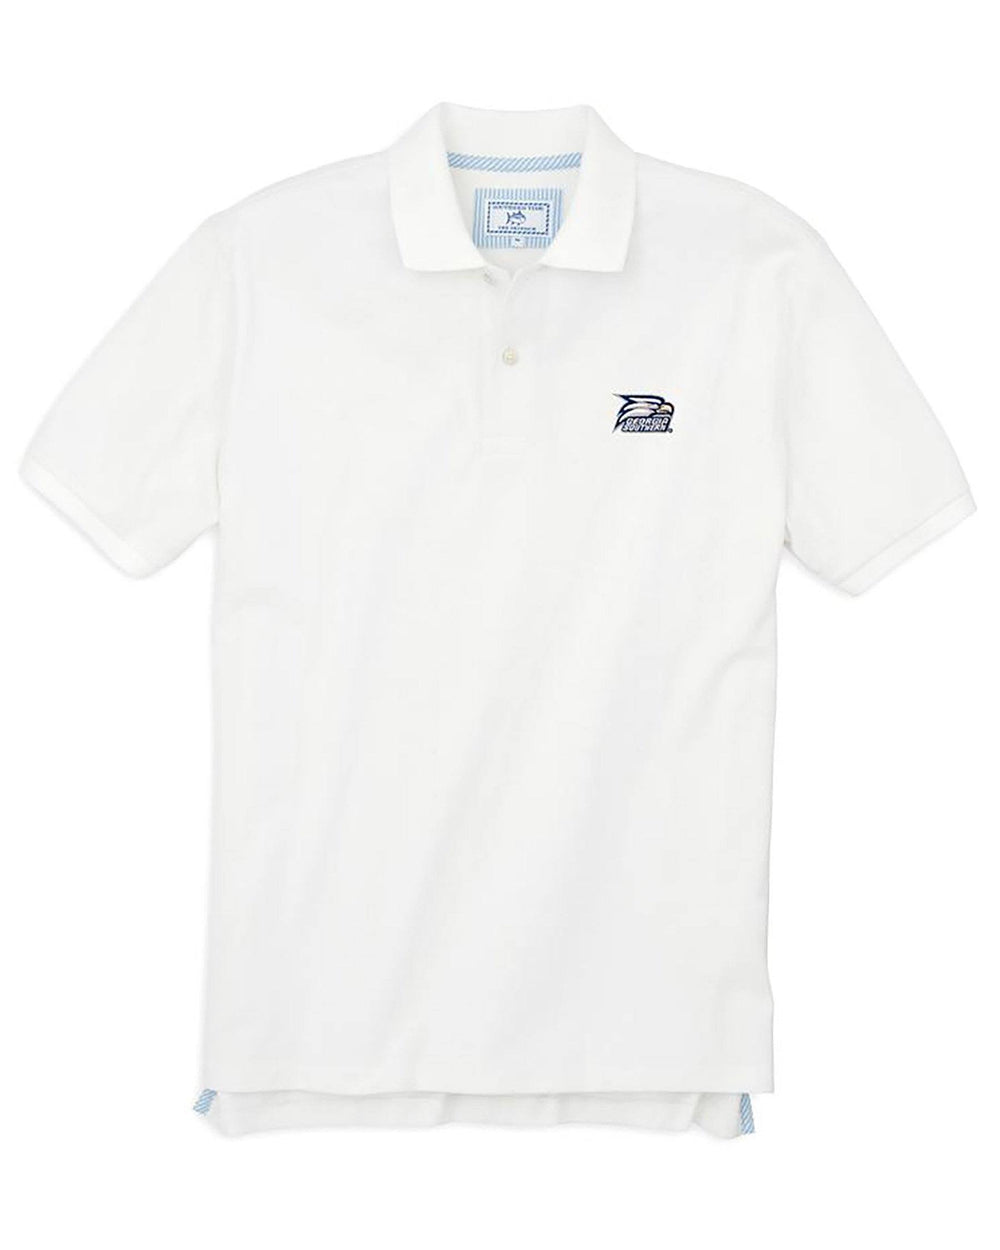 The front view of the Men's White Georgia Southern Pique Polo Shirt by Southern Tide - Classic White